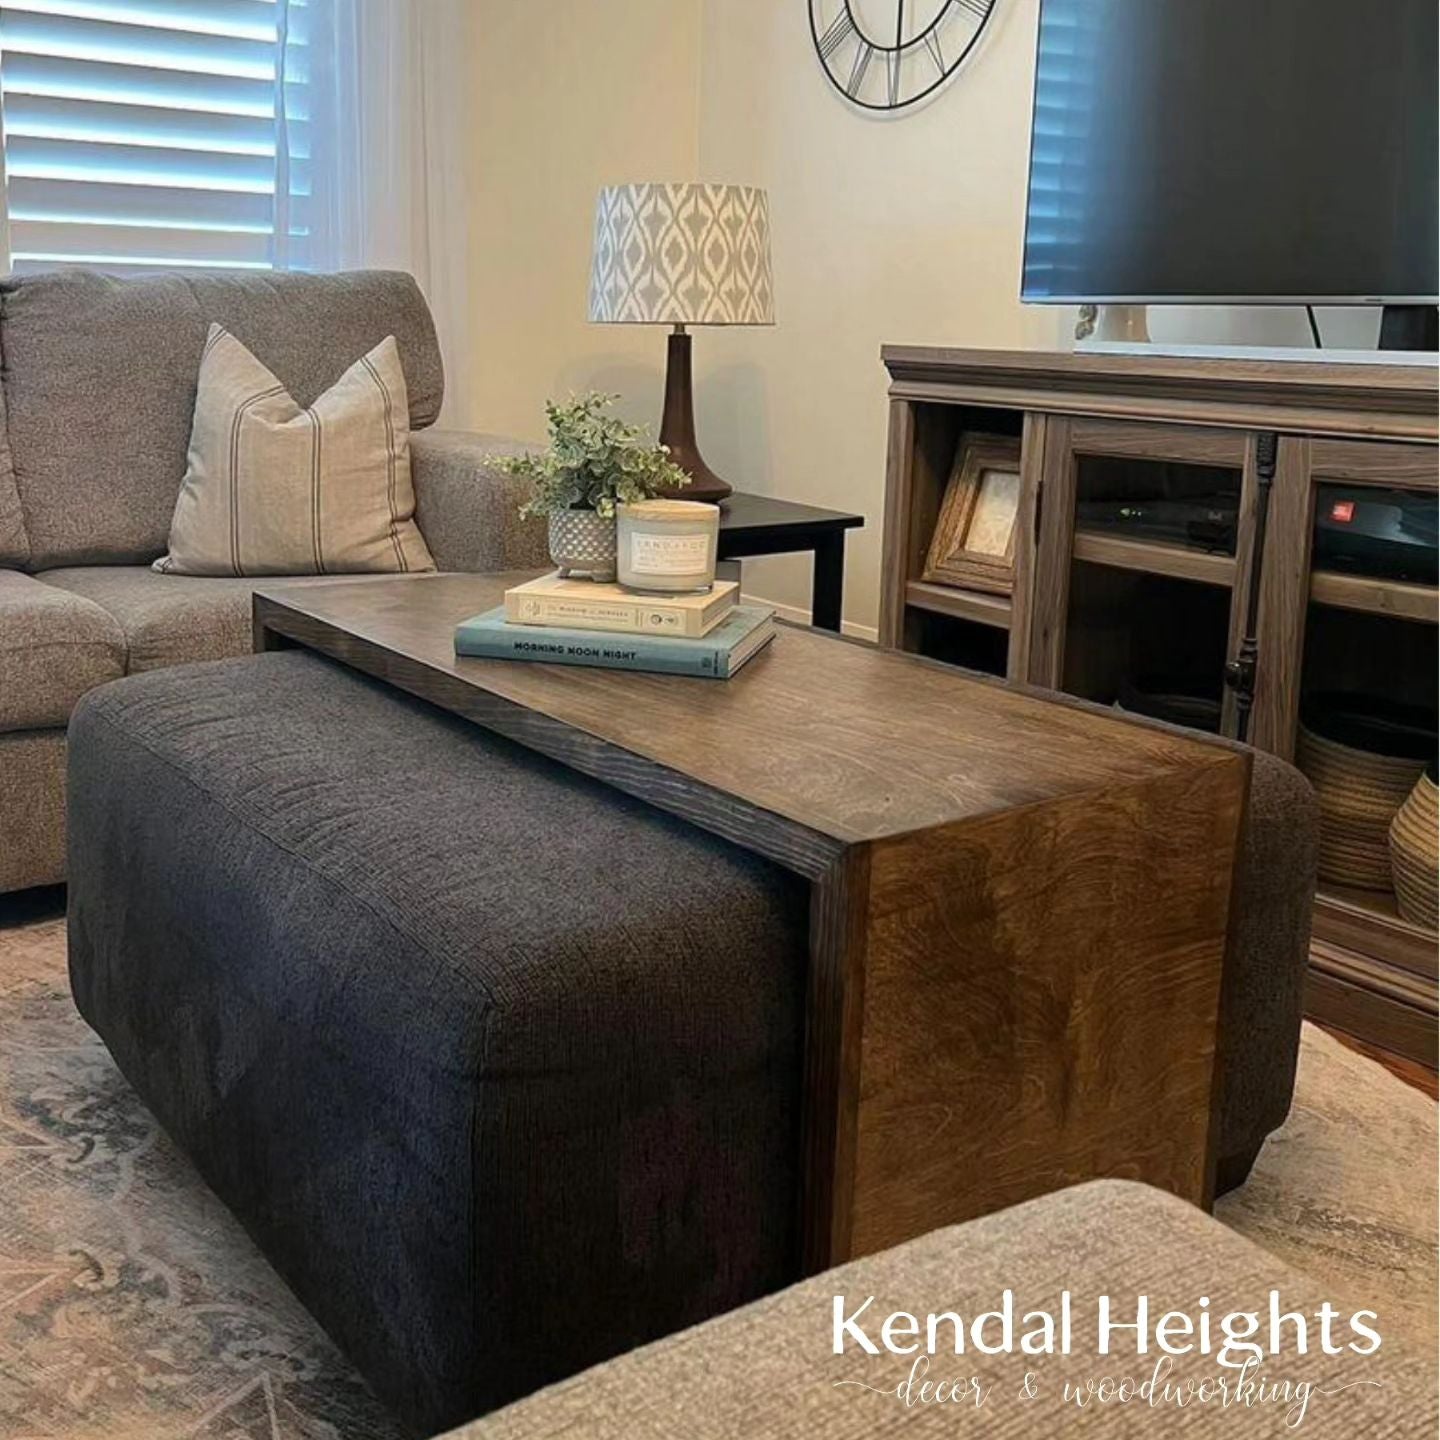 Kendal Heights Decor Woodworking